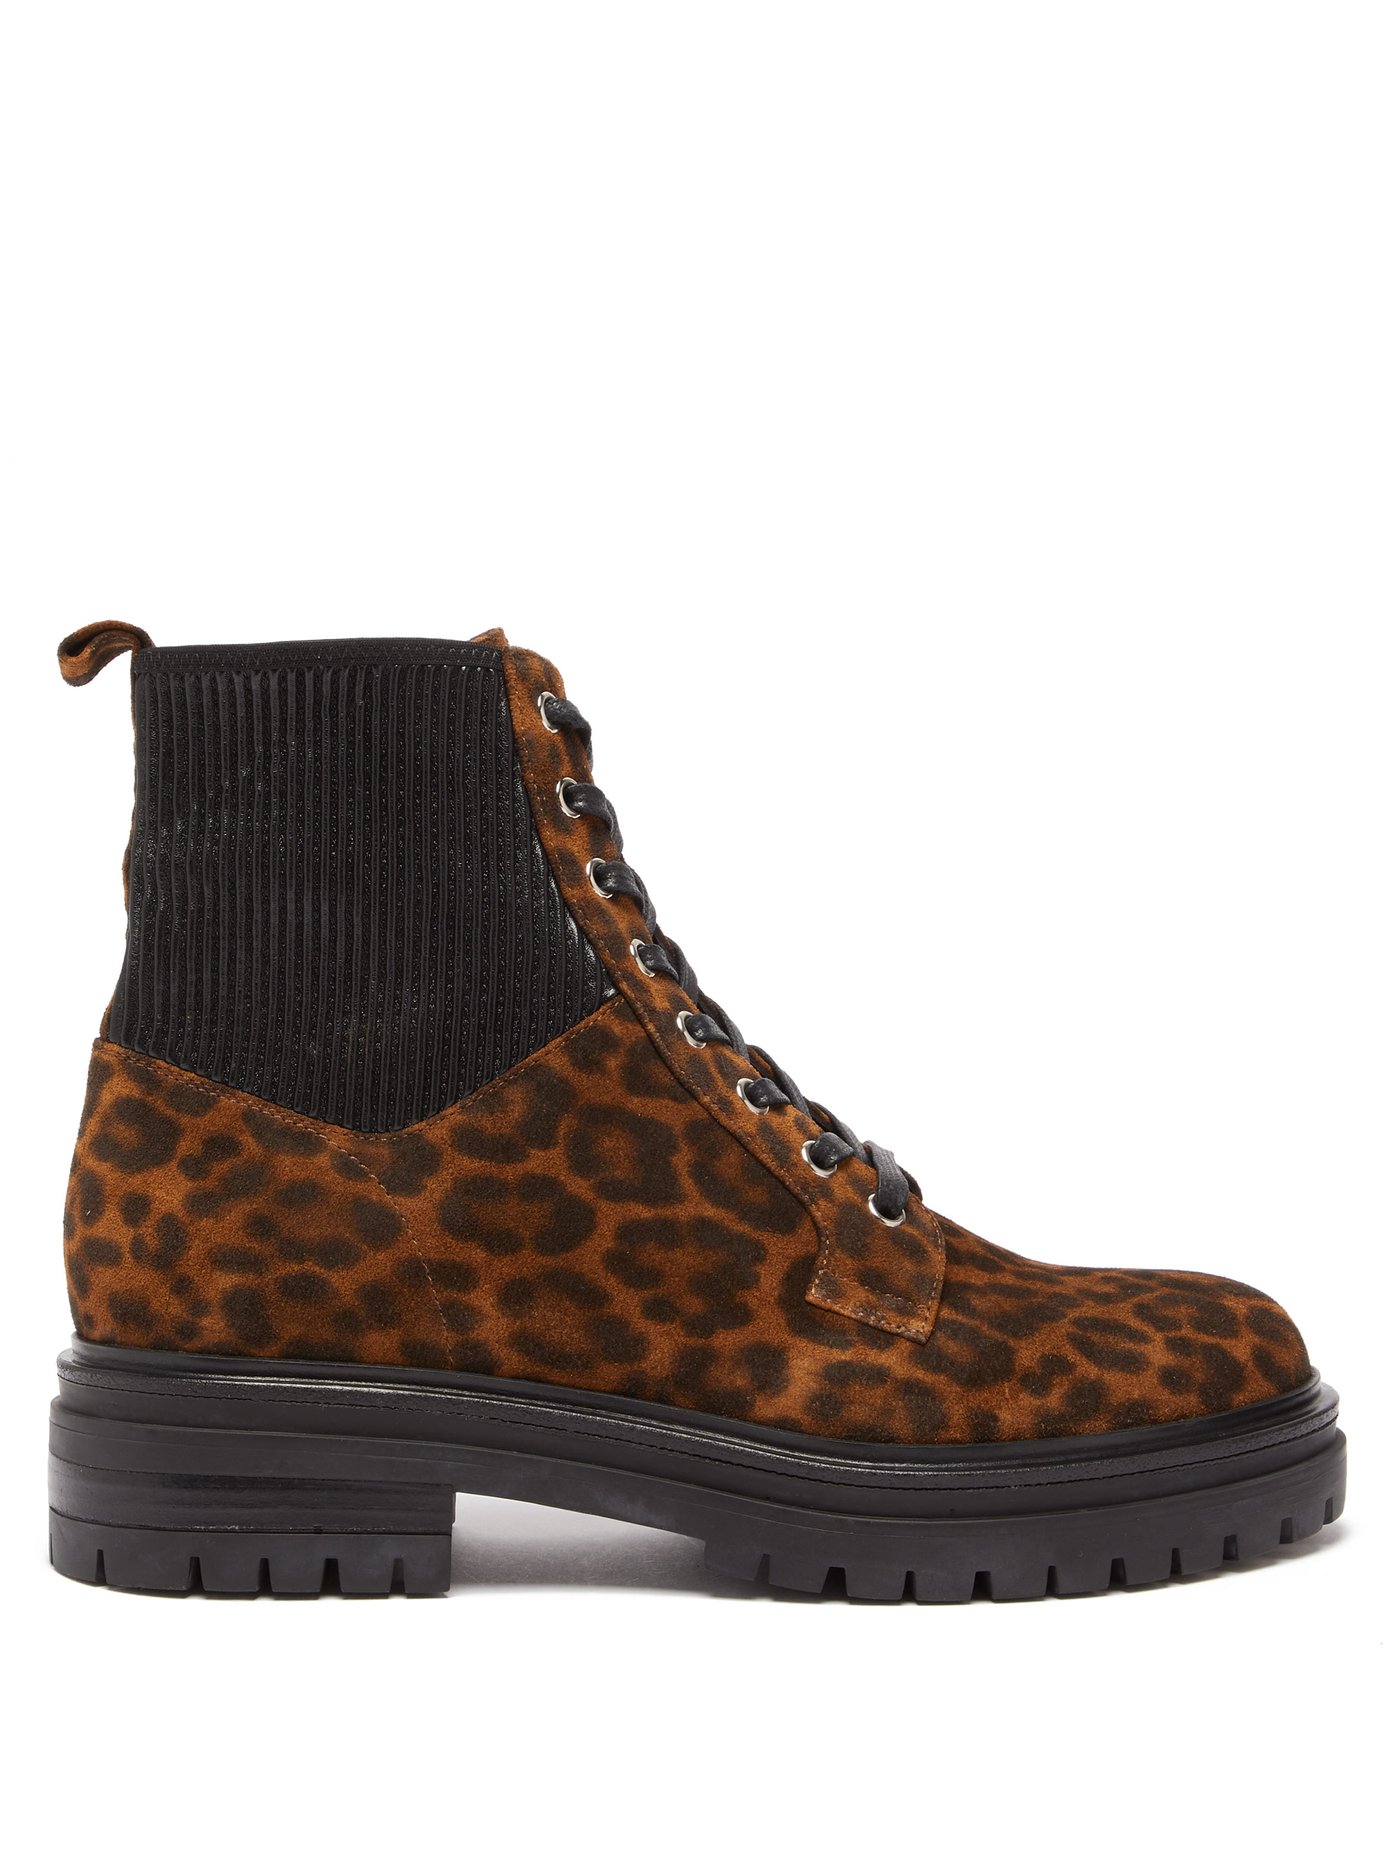 rossi leopard boots